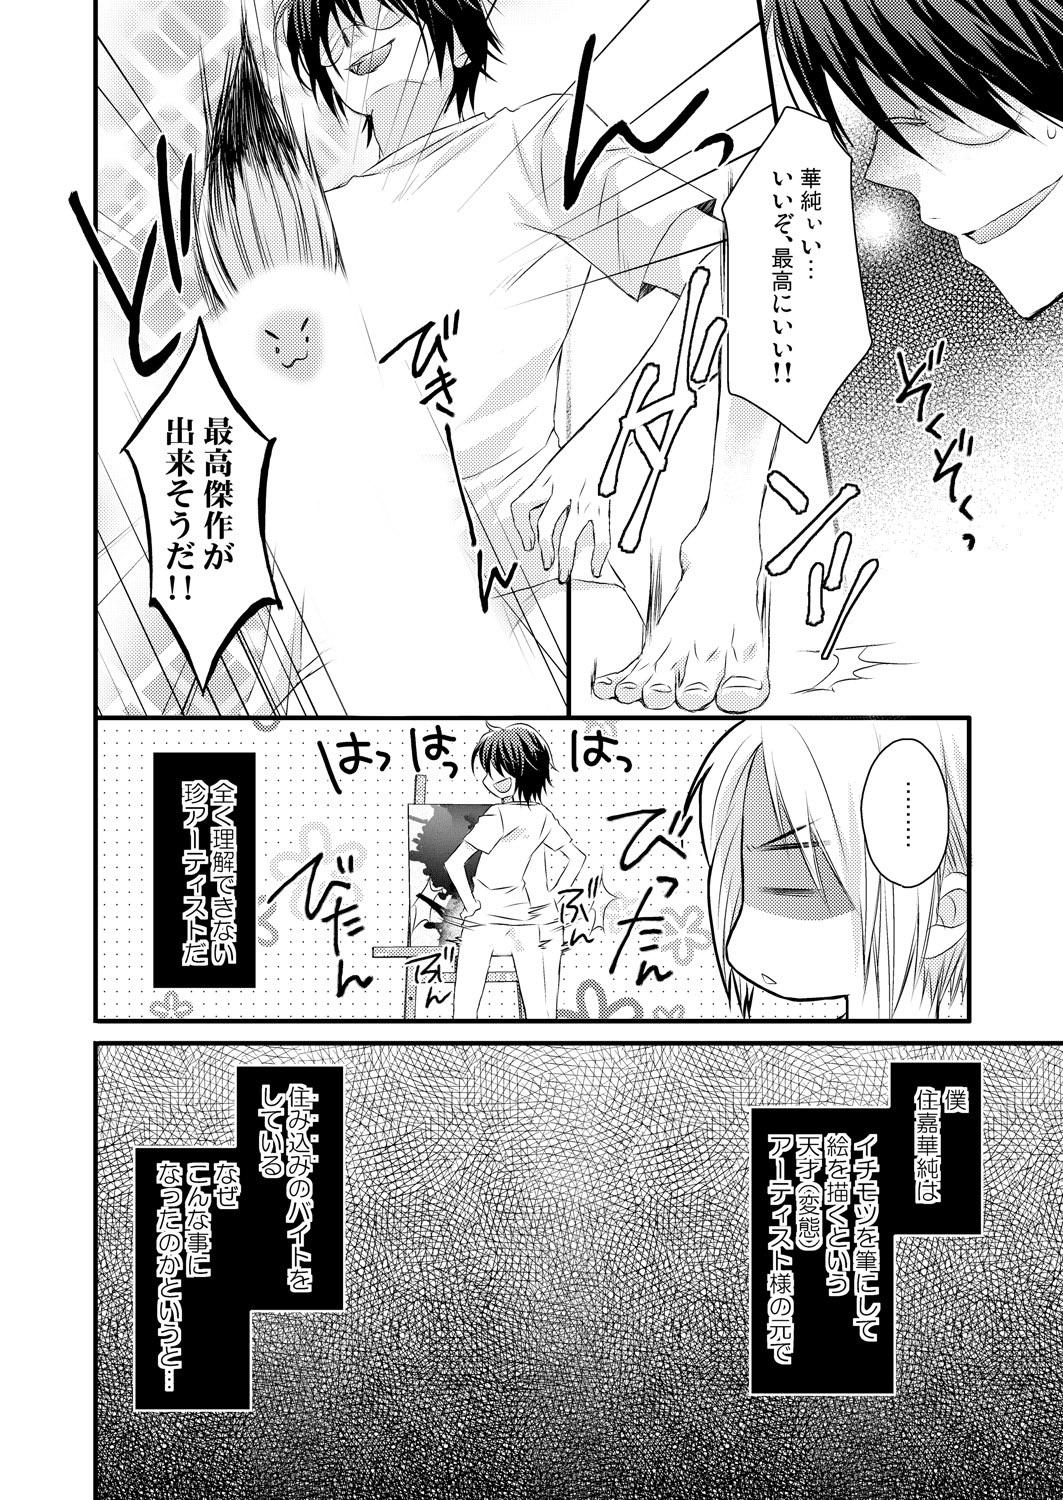 Gostoso 発情♂ゲイ術家～喘ぎアートはシモの筆で～ Made - Page 6